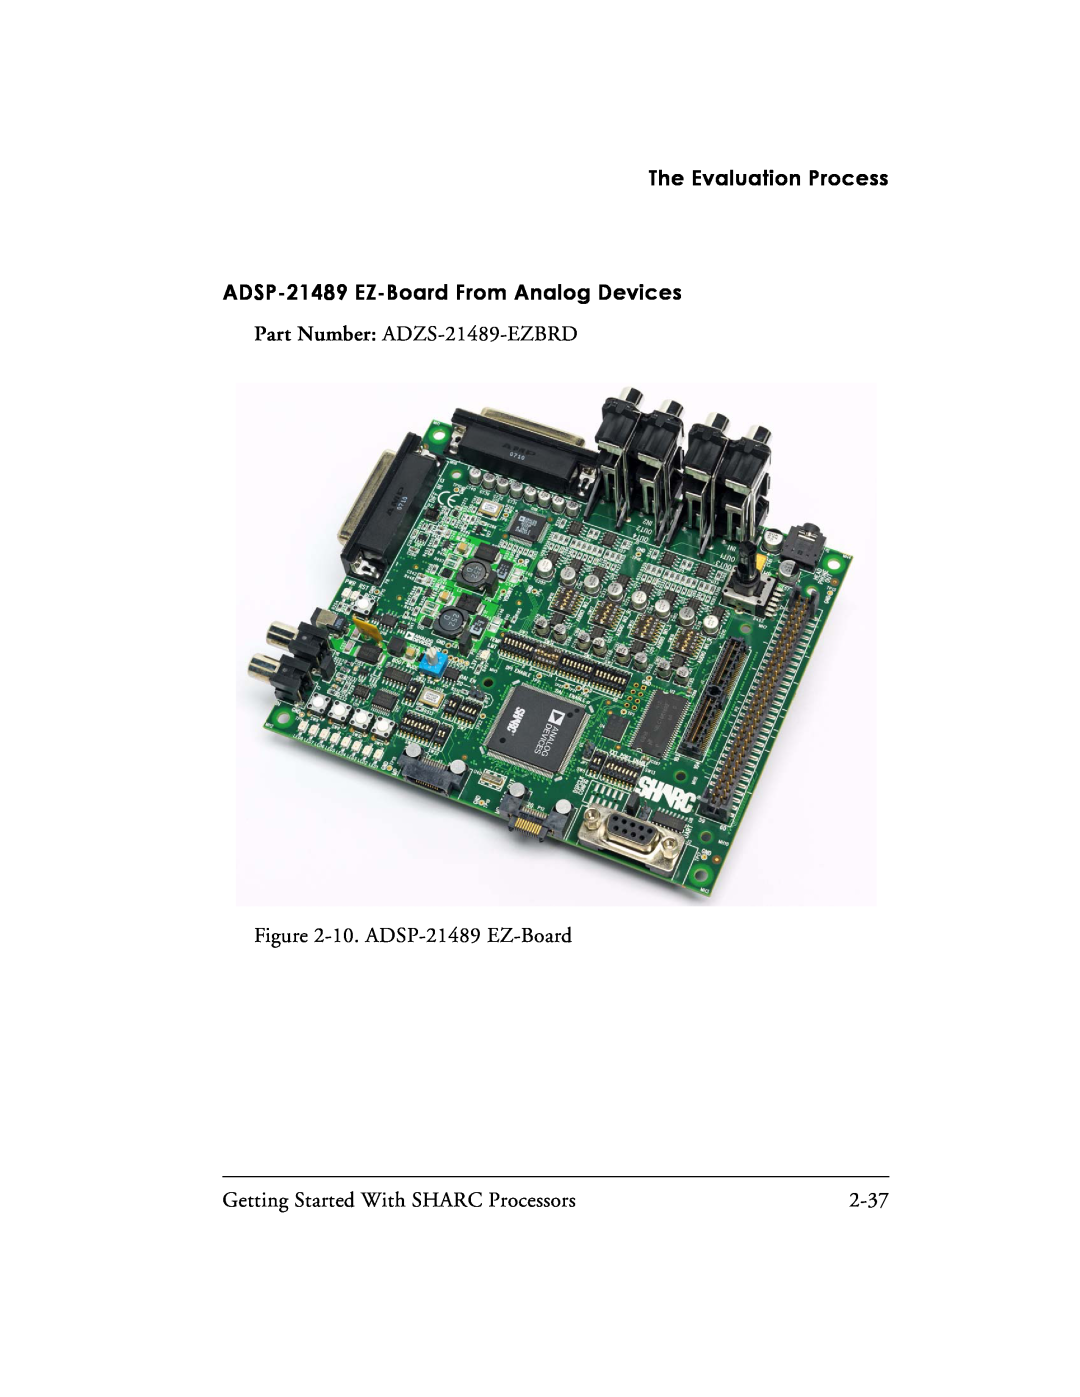 Analog Devices 82-003536-01 ADSP-21489 EZ-BoardFrom Analog Devices, The Evaluation Process, Part Number ADZS-21489-EZBRD 